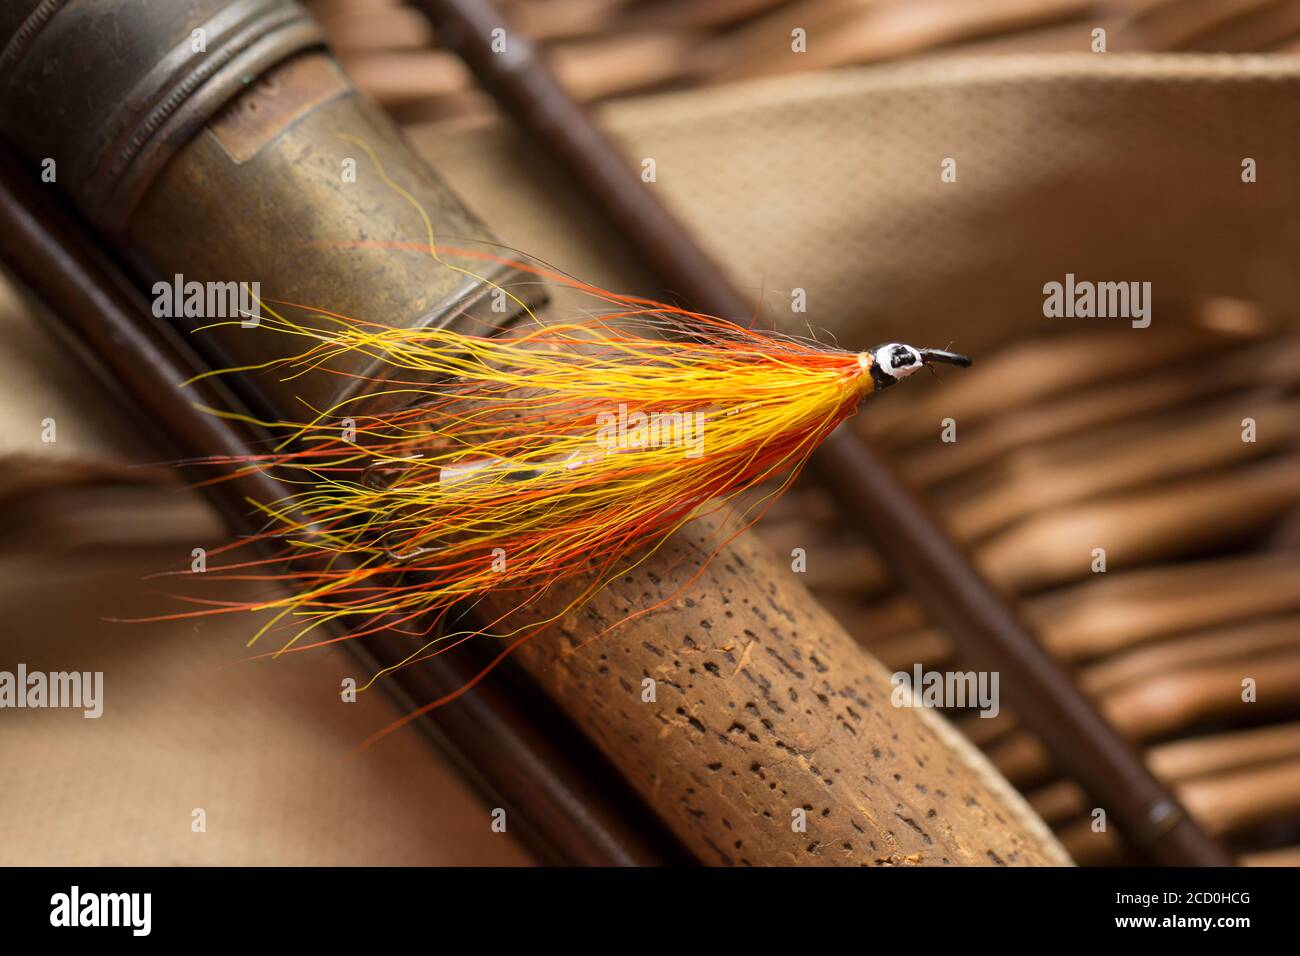 https://c8.alamy.com/comp/2CD0HCG/a-single-salmon-fly-that-was-probably-homemade-on-the-cork-handle-of-an-old-wooden-salmon-fly-fishing-rod-from-a-collection-of-vintage-fishing-tackle-2CD0HCG.jpg